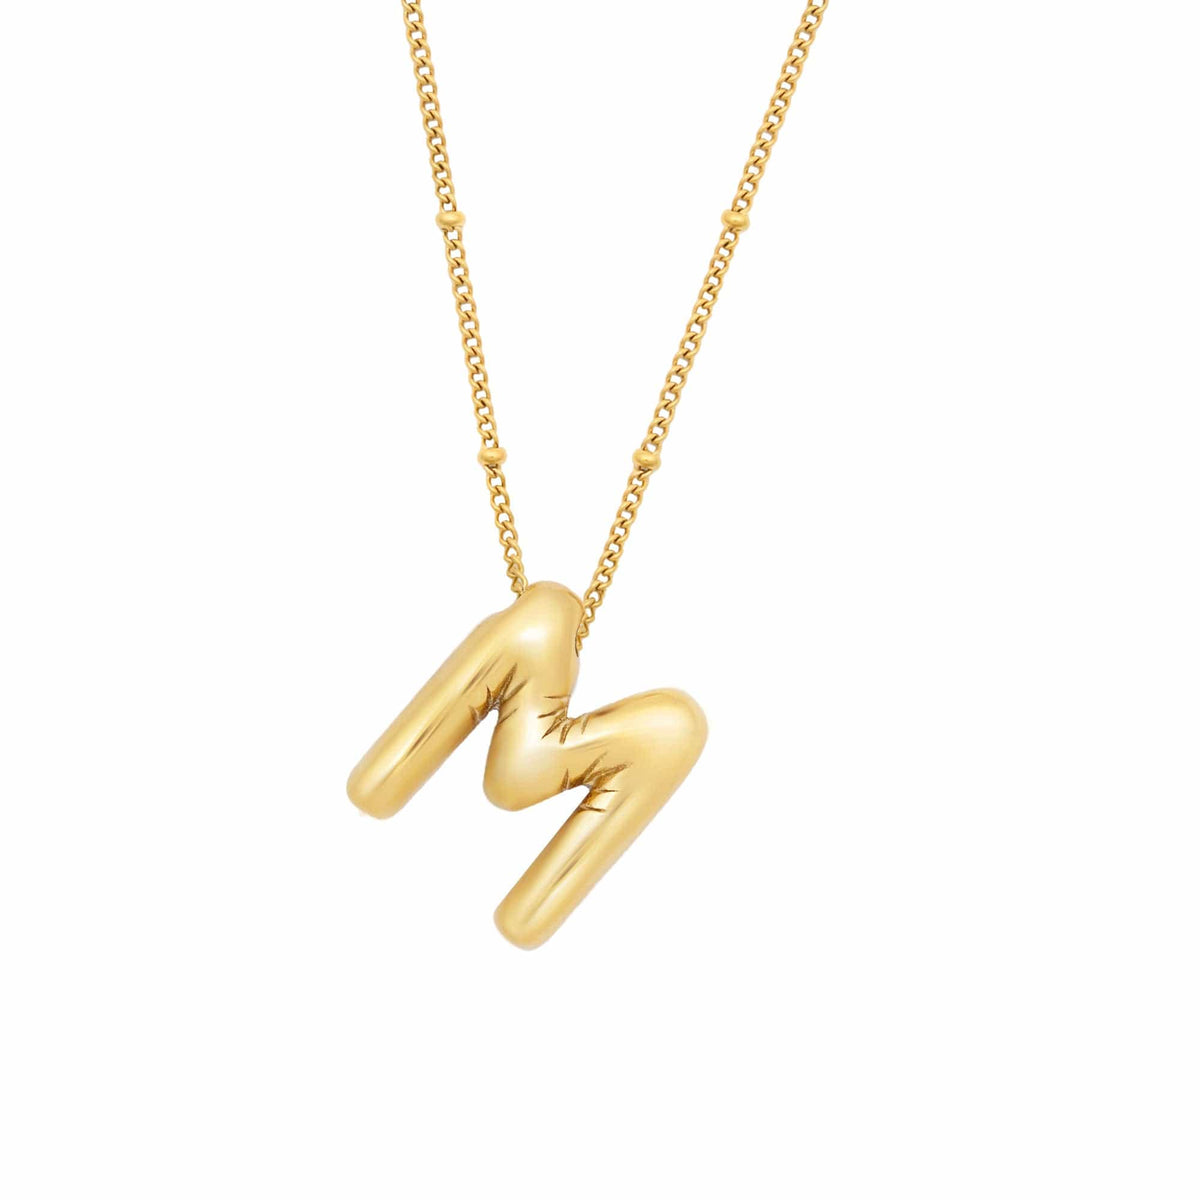 Bohomoon Stainless Steel Zara Initial Necklace